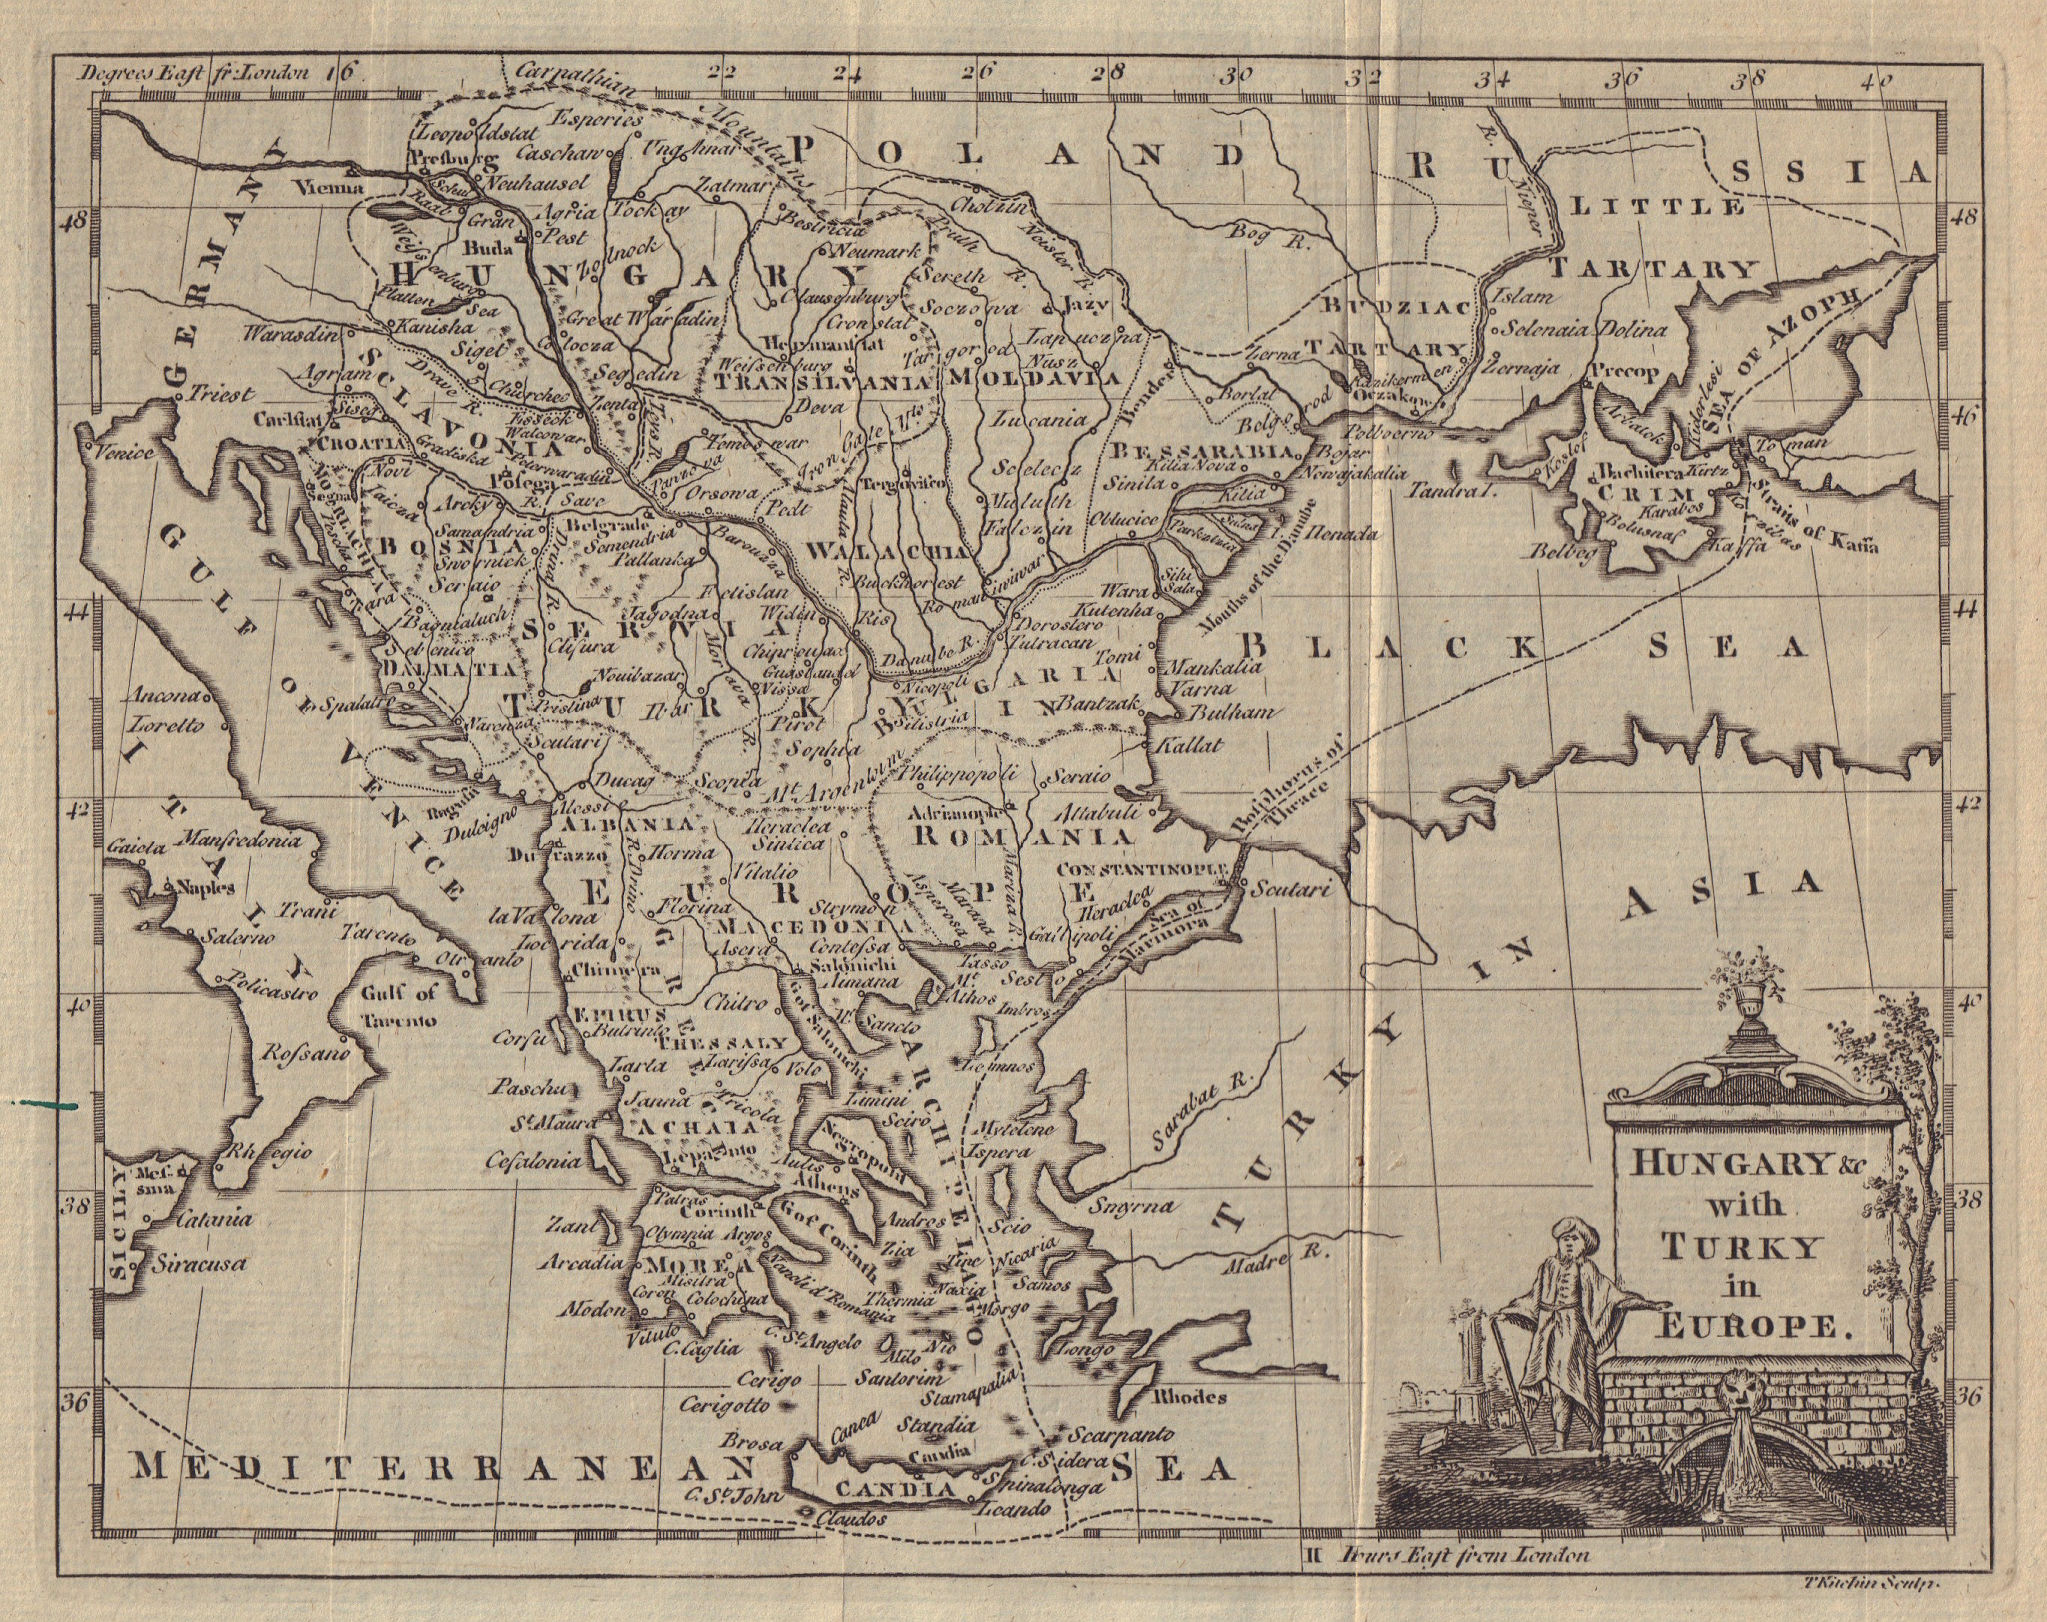 Associate Product Hungary &c with Turky in Europe. Balkans Greece Ukraine. KITCHIN 1782 old map